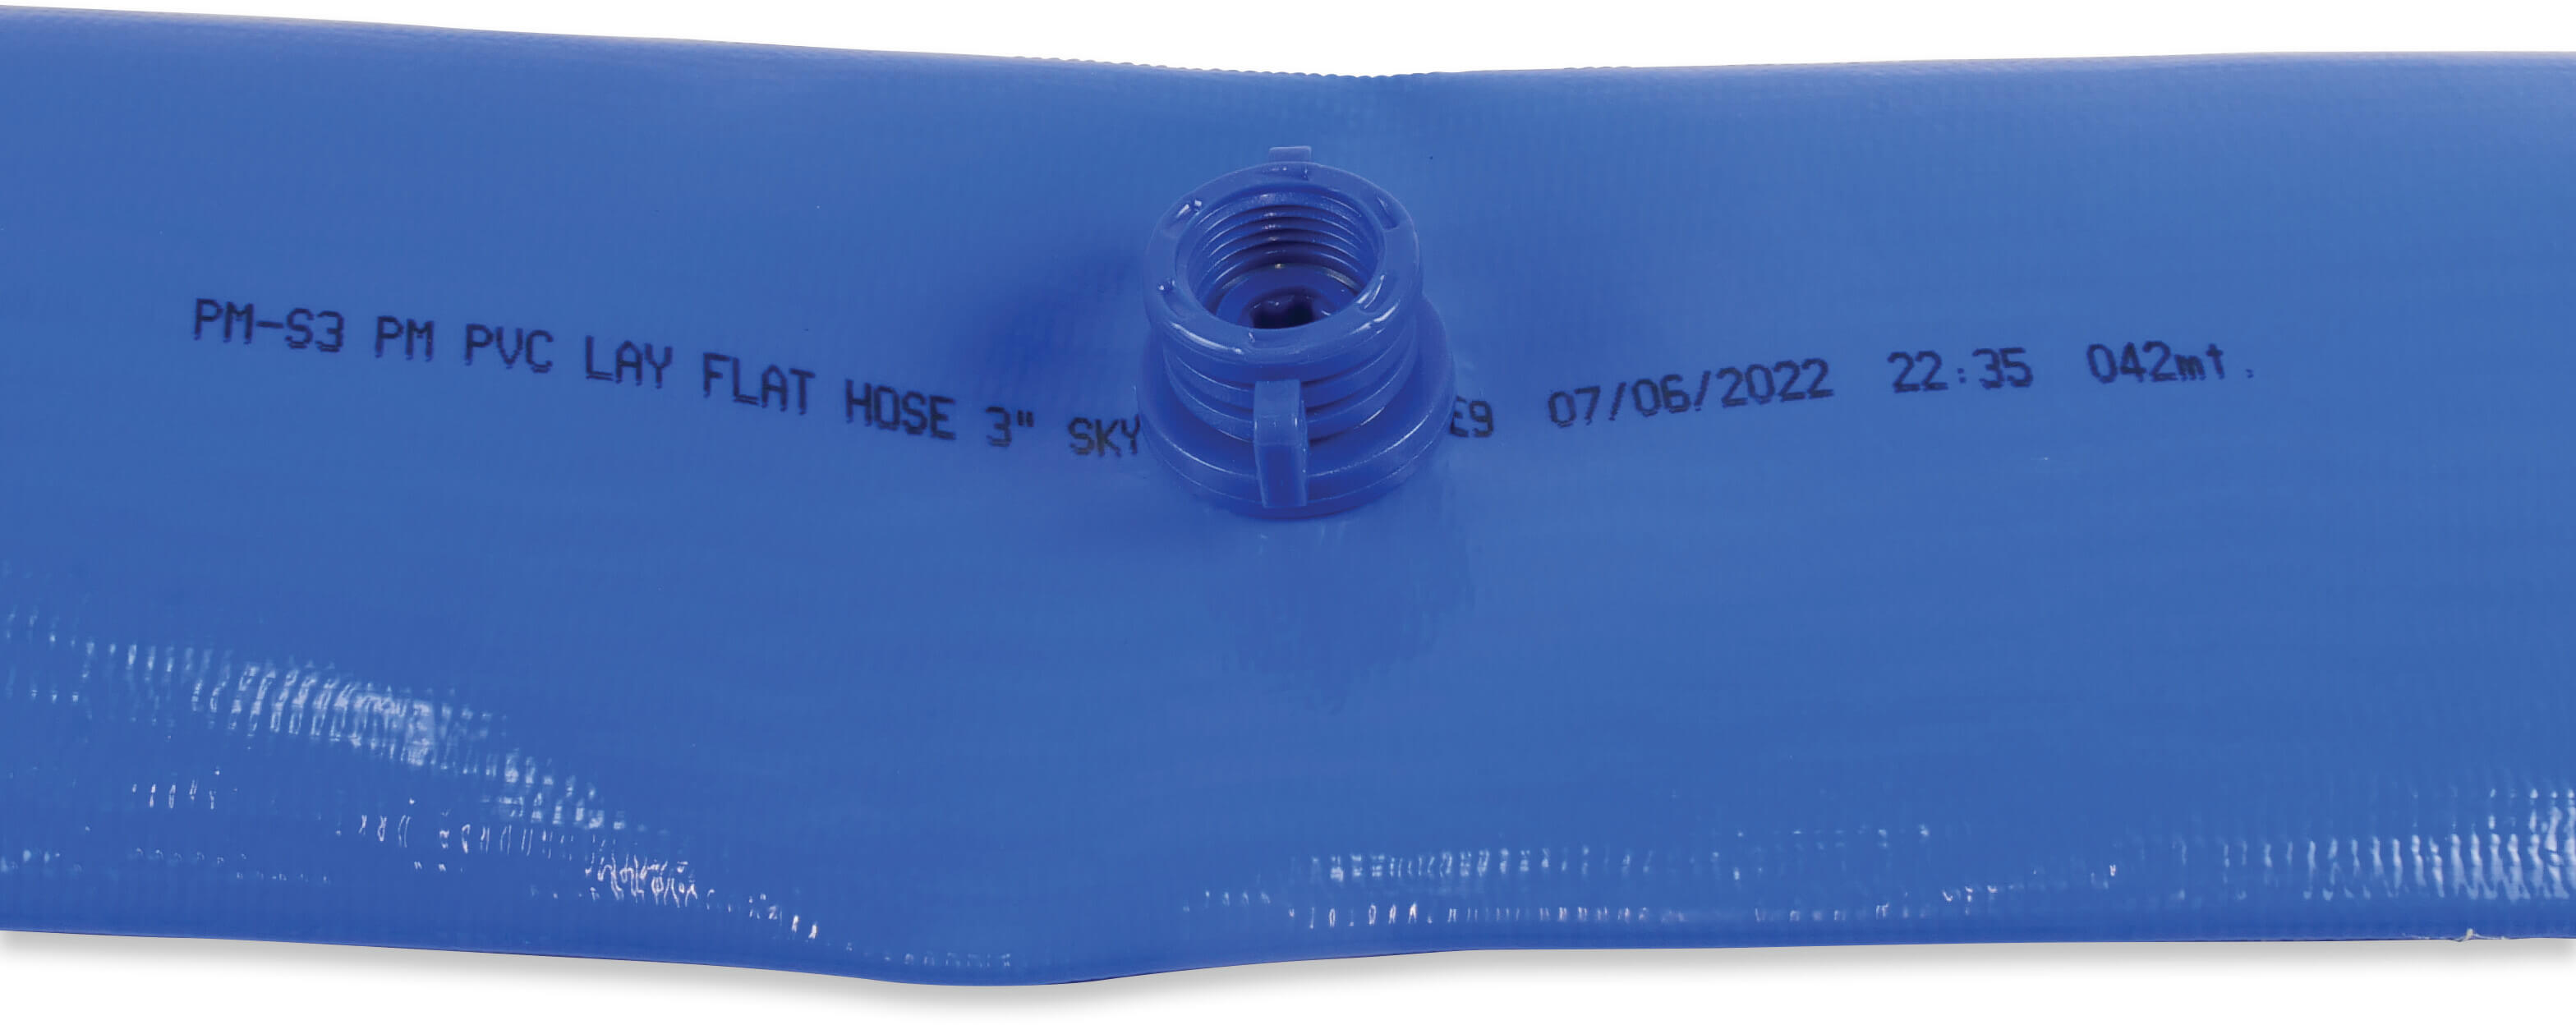 Flat hose PVC 76 mm 4bar dark blue 100m type with prefabricated outlets 100 cm